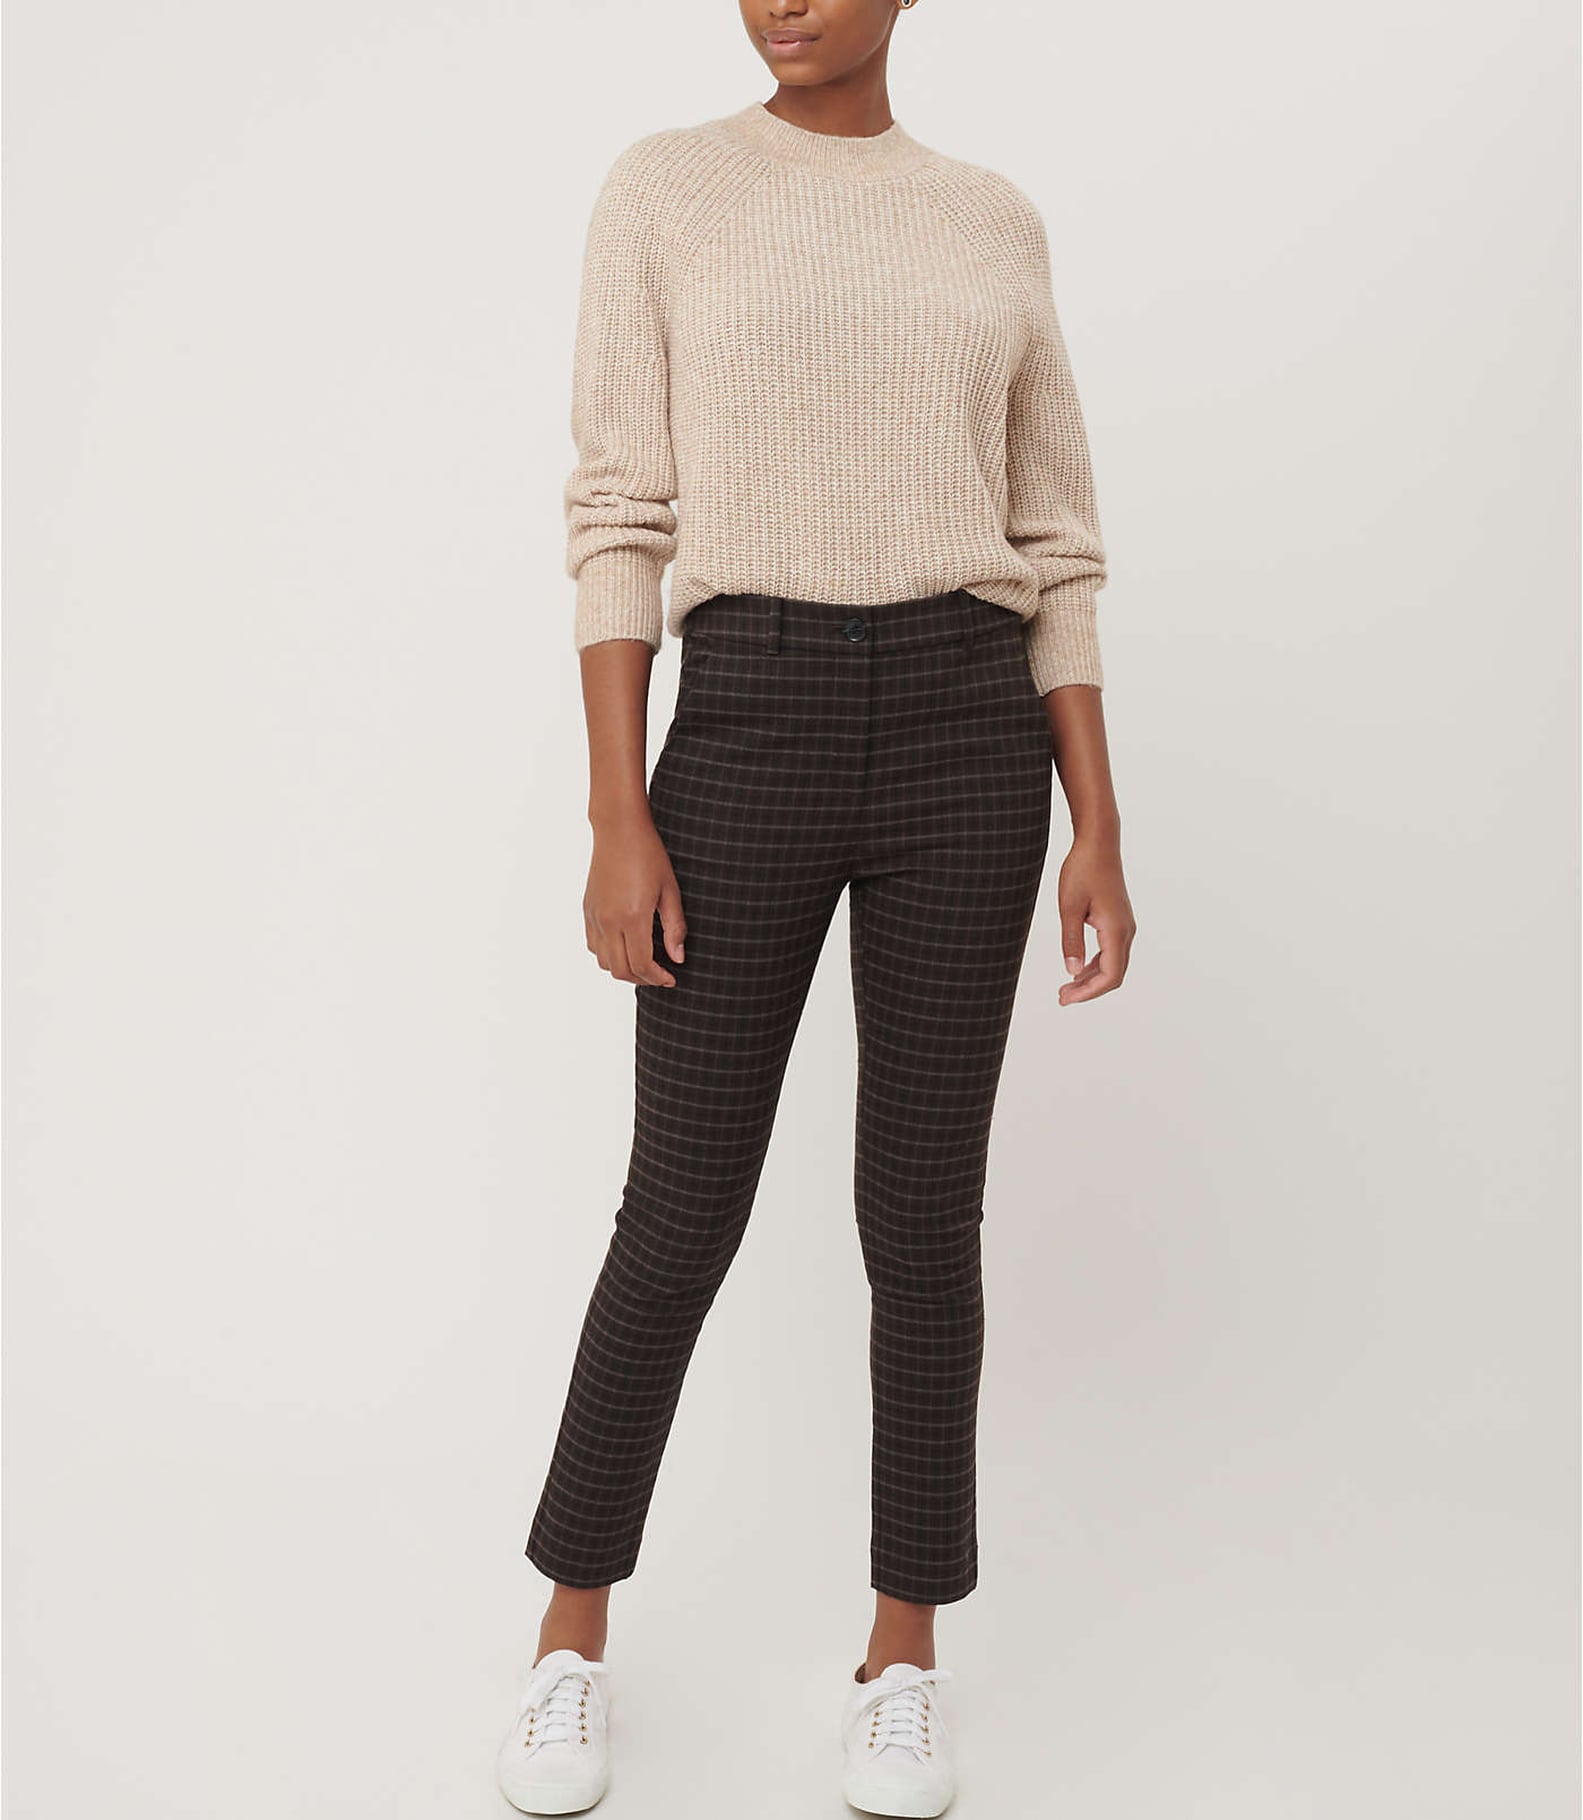 The Best New Clothes From Loft | Winter 2020 | POPSUGAR Fashion